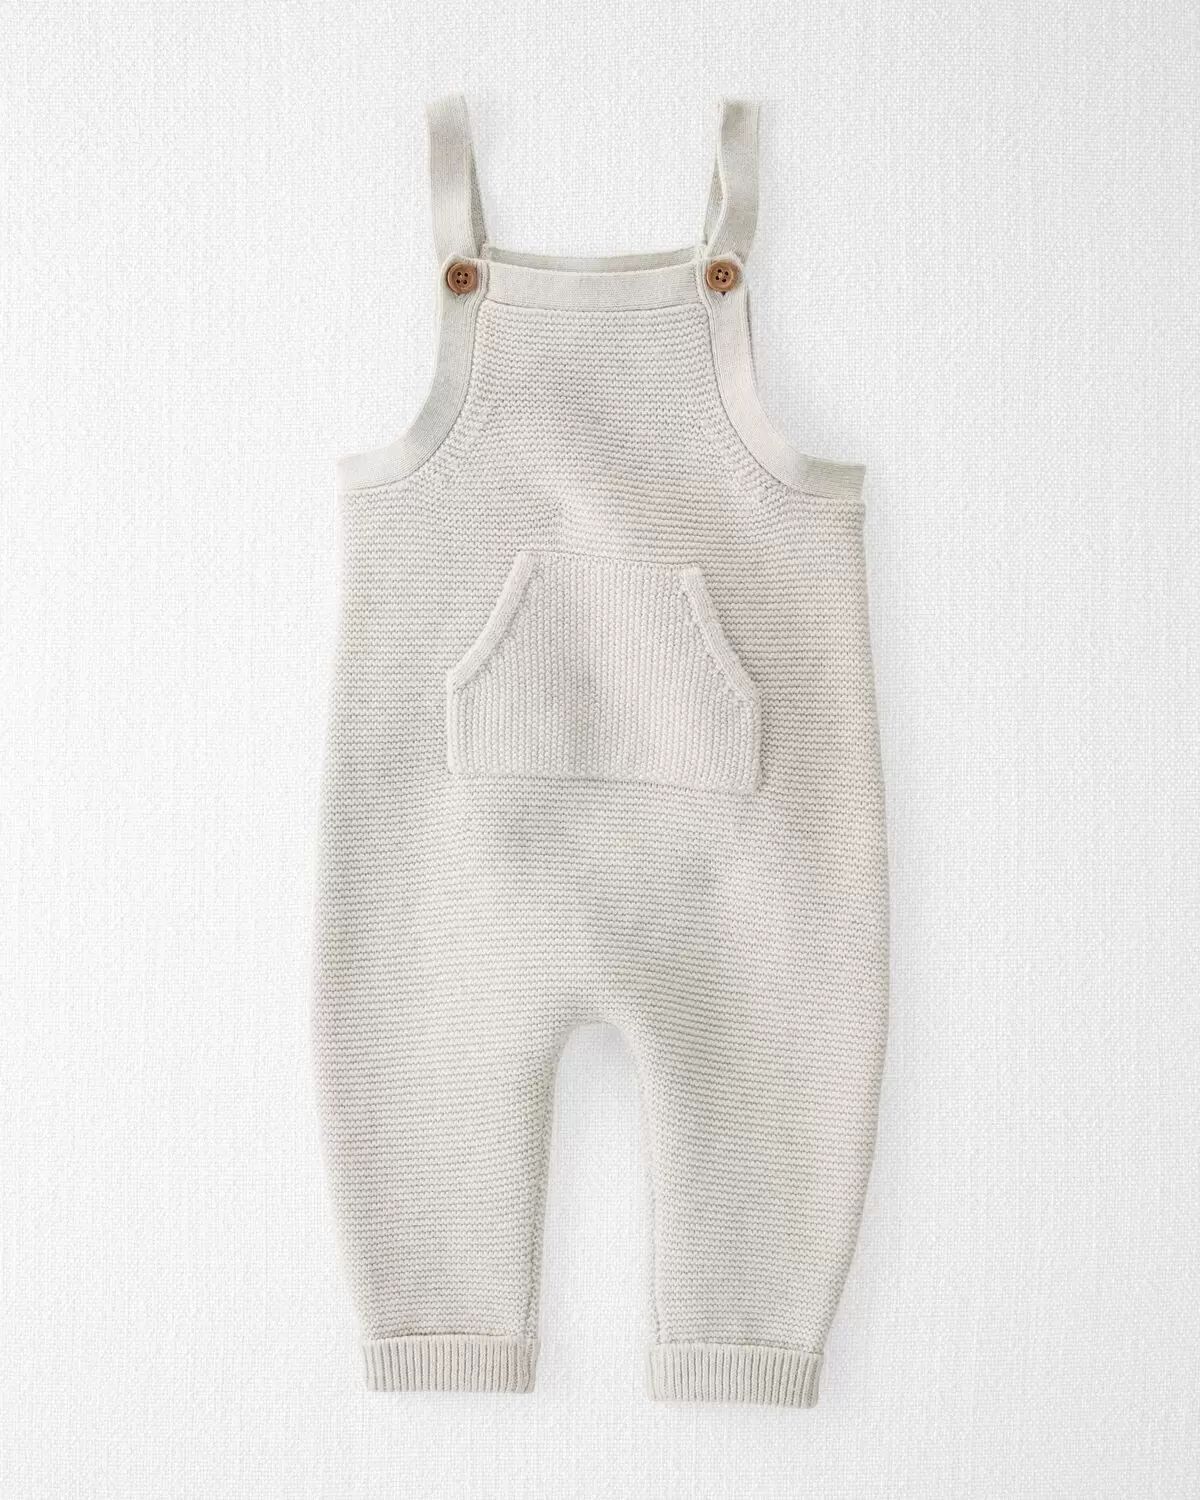 Heather Gray Baby Organic Cotton Sweater Knit Overalls in Heather Gray | carters.com | Carter's